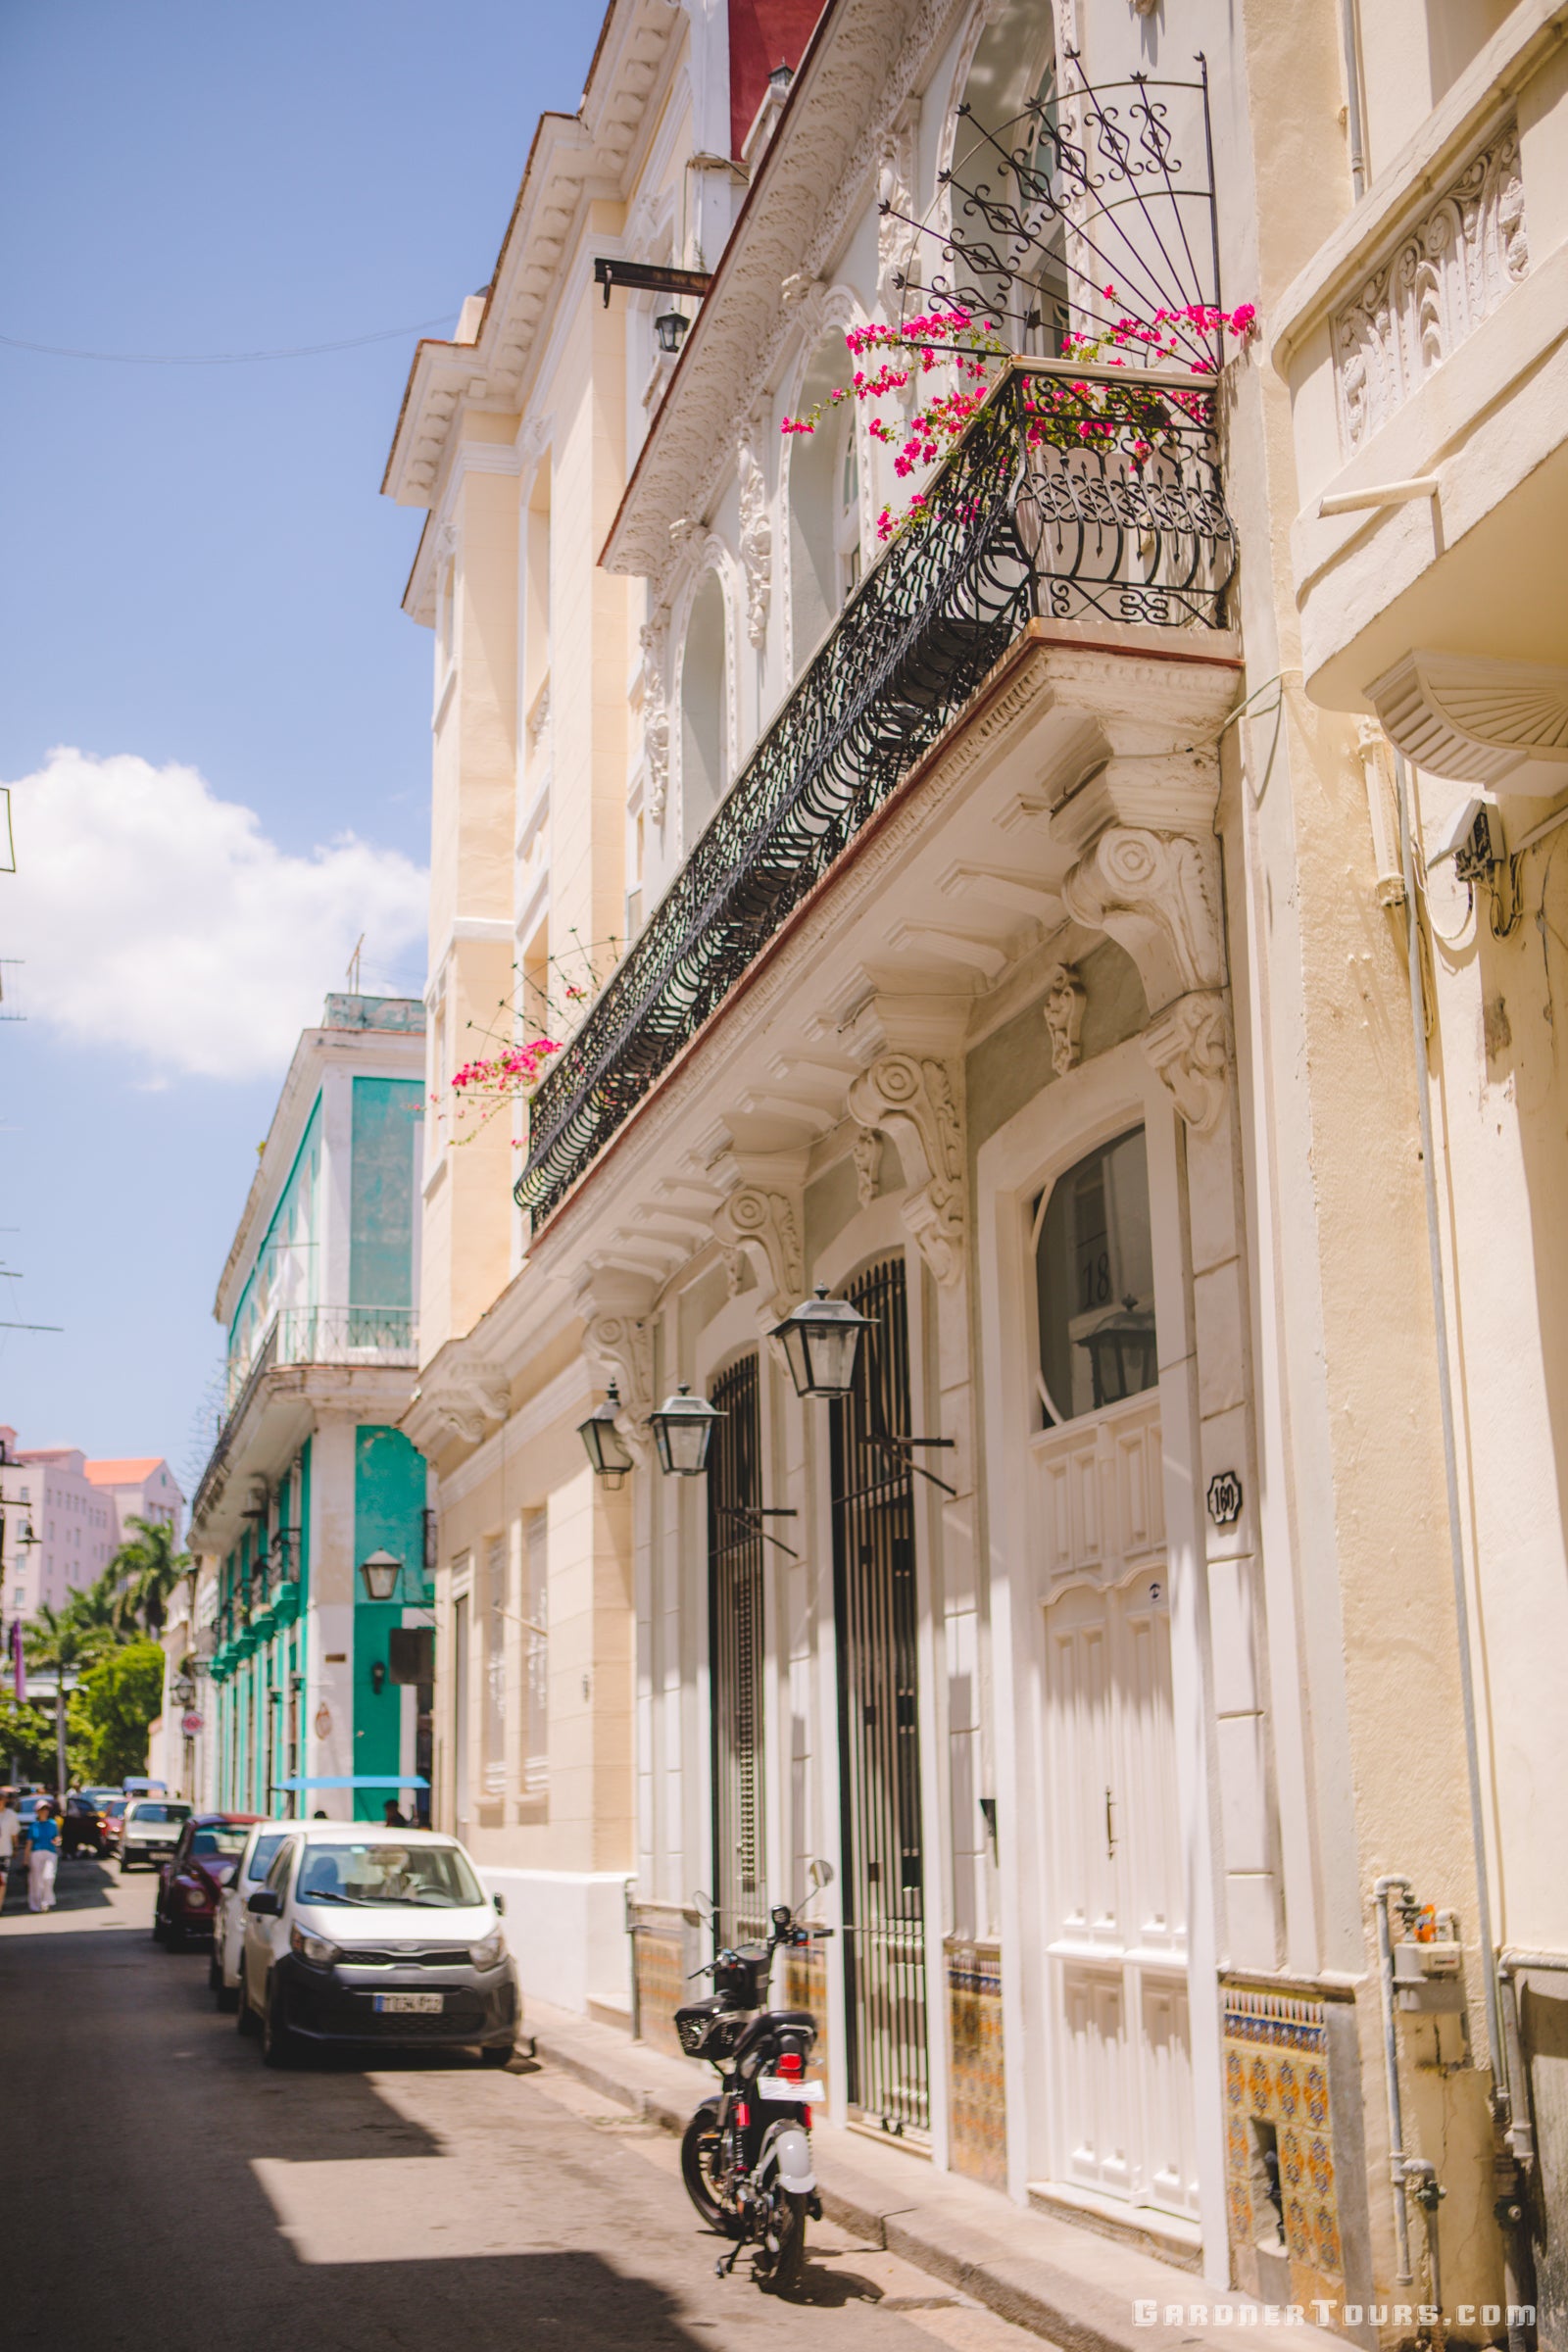 A White Luxury BnB from the Street with Black Iron Work and Flowers hanging on the balcony in Old Havana, Cuba 